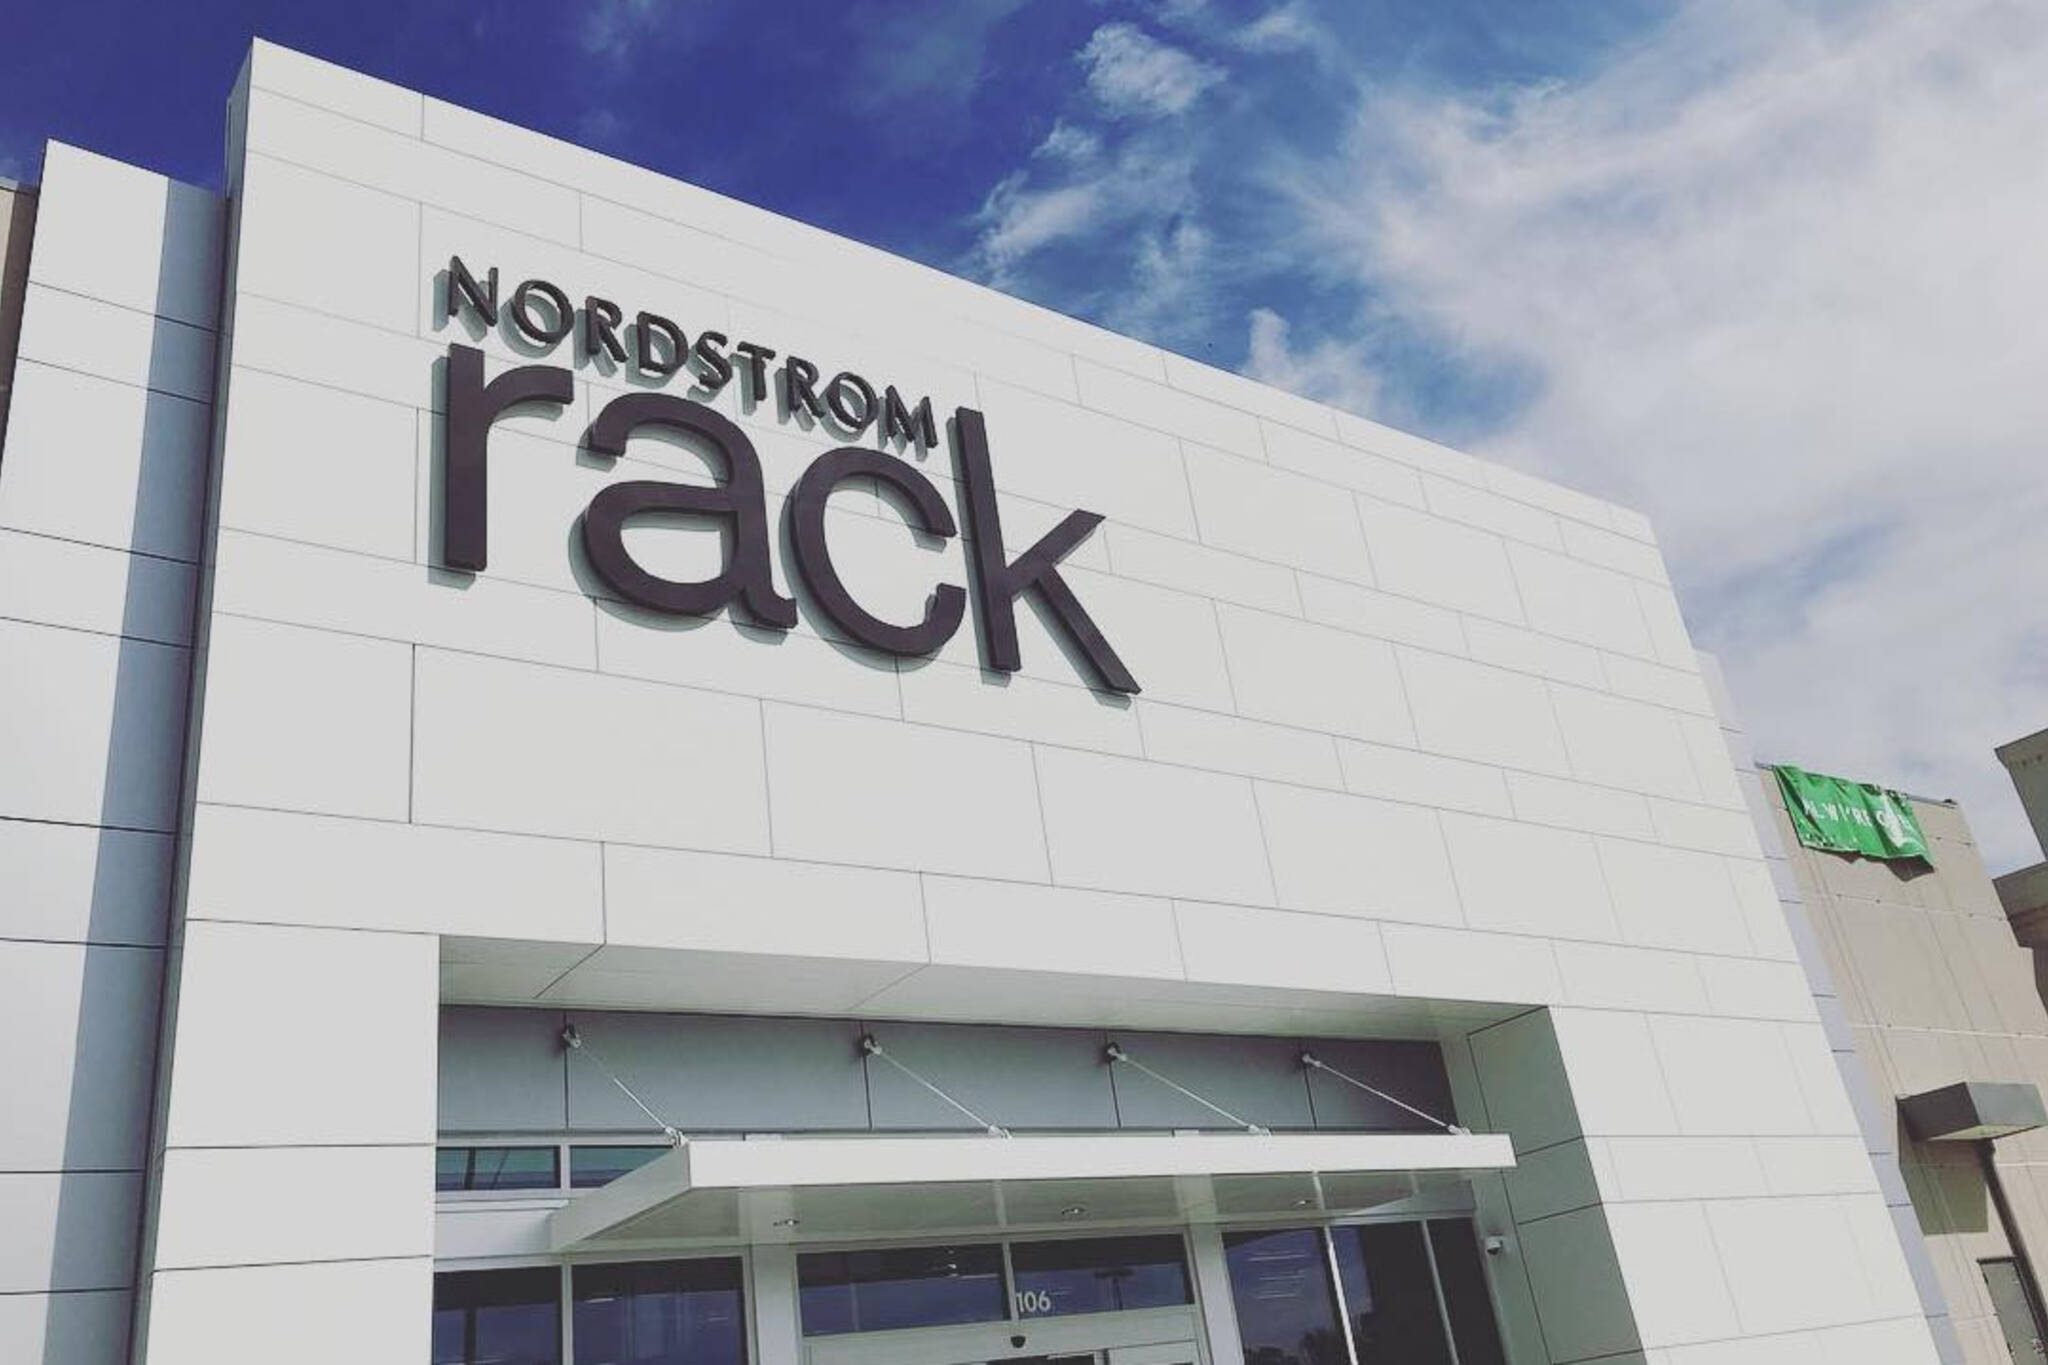 Nordstrom Rack is opening in Toronto this month